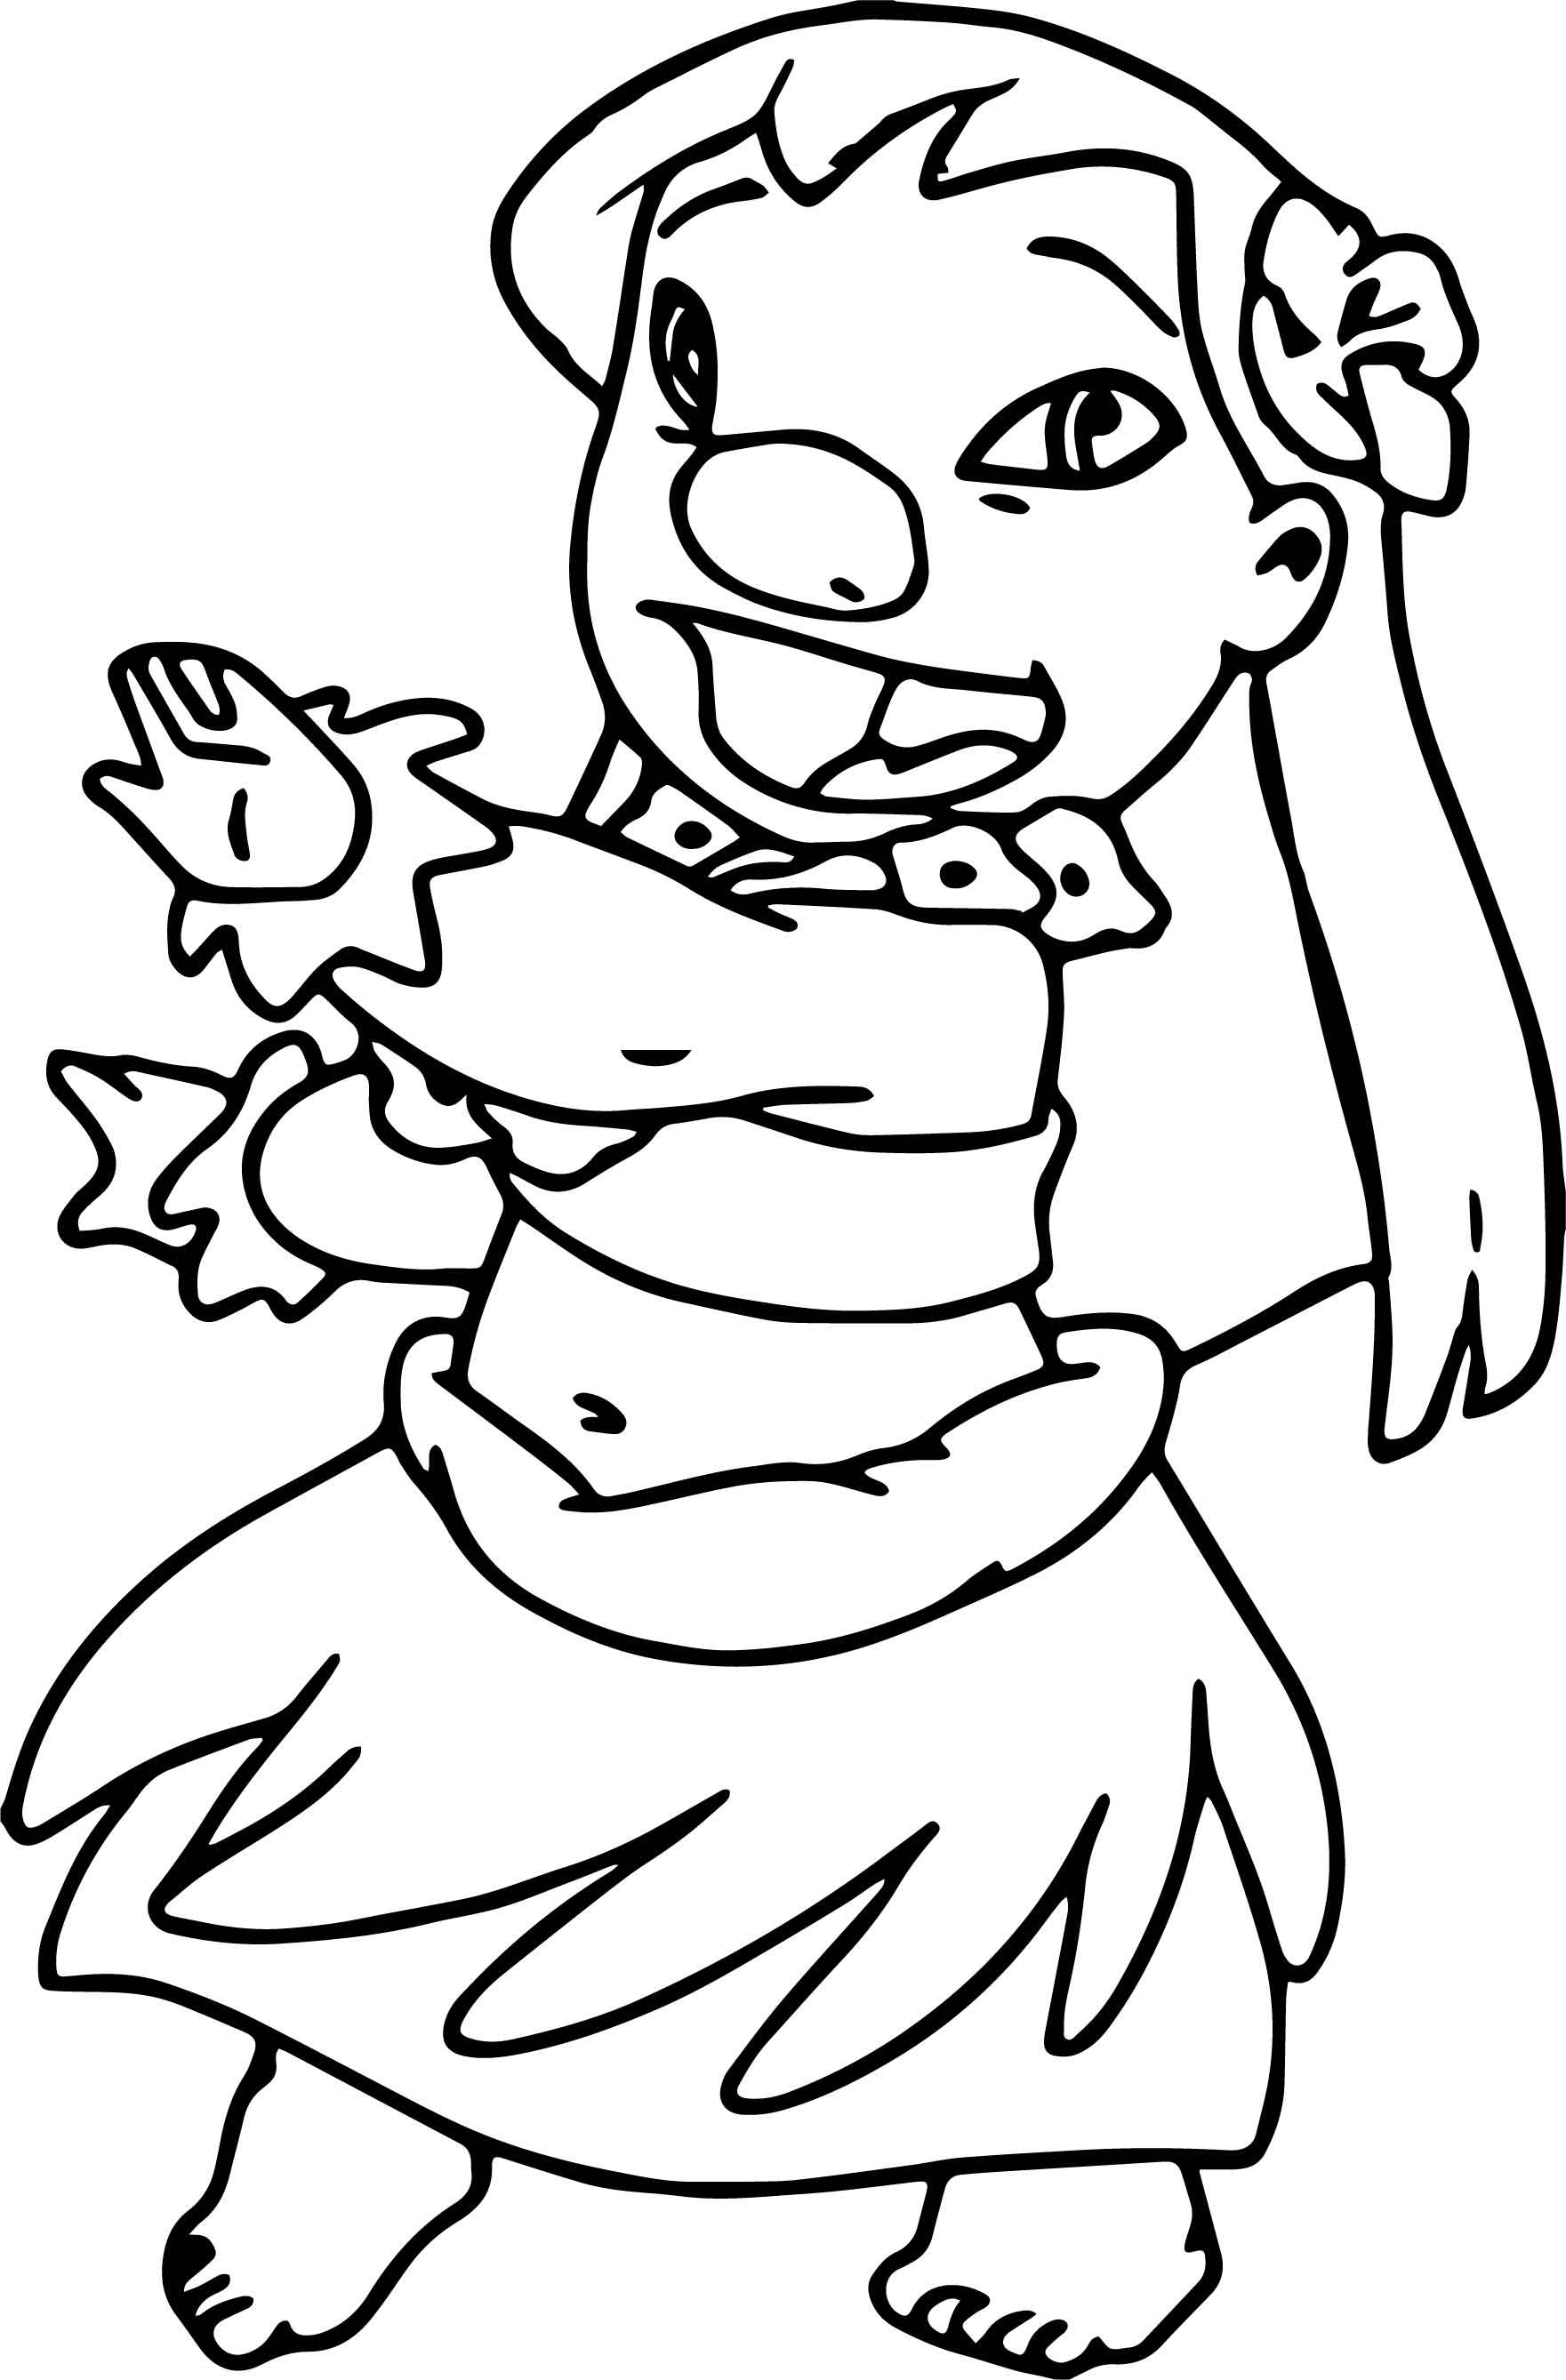 Lilo Coloring Pages at GetColorings.com | Free printable colorings